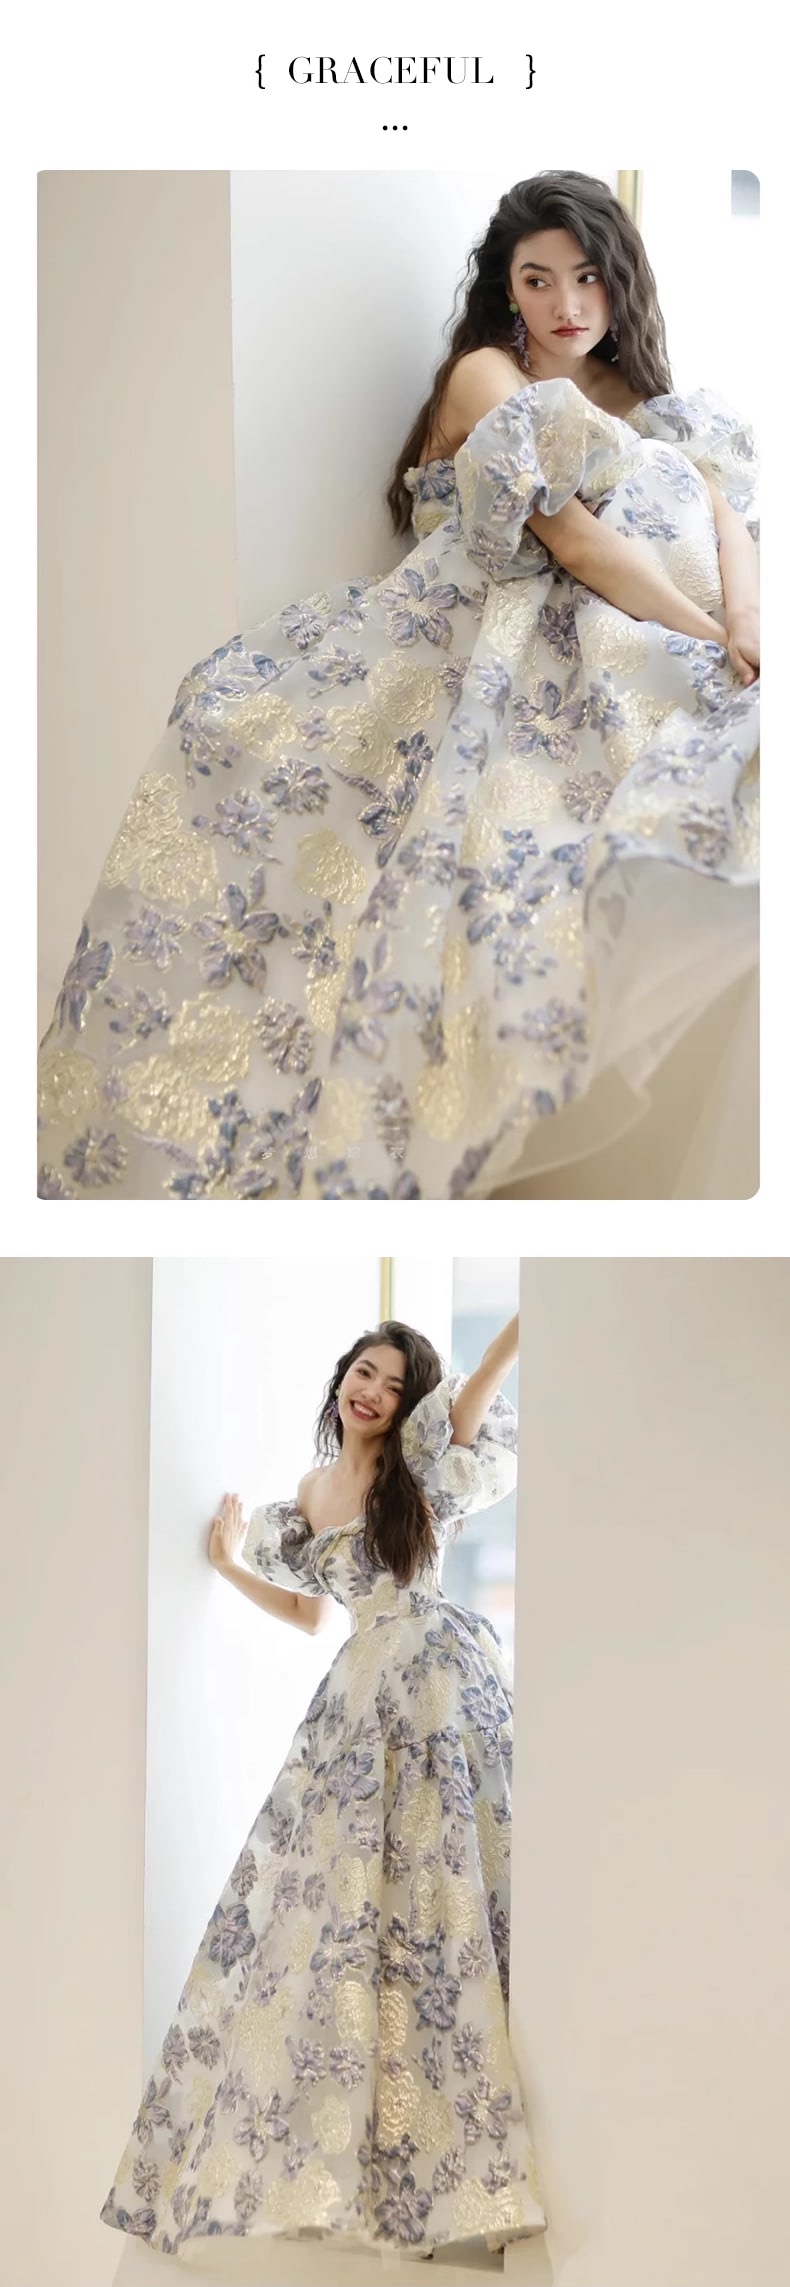 Charming-Floral-Jacquard-Fluffy-Skirt-Tube-Evening-Banquet-Party-Dress11